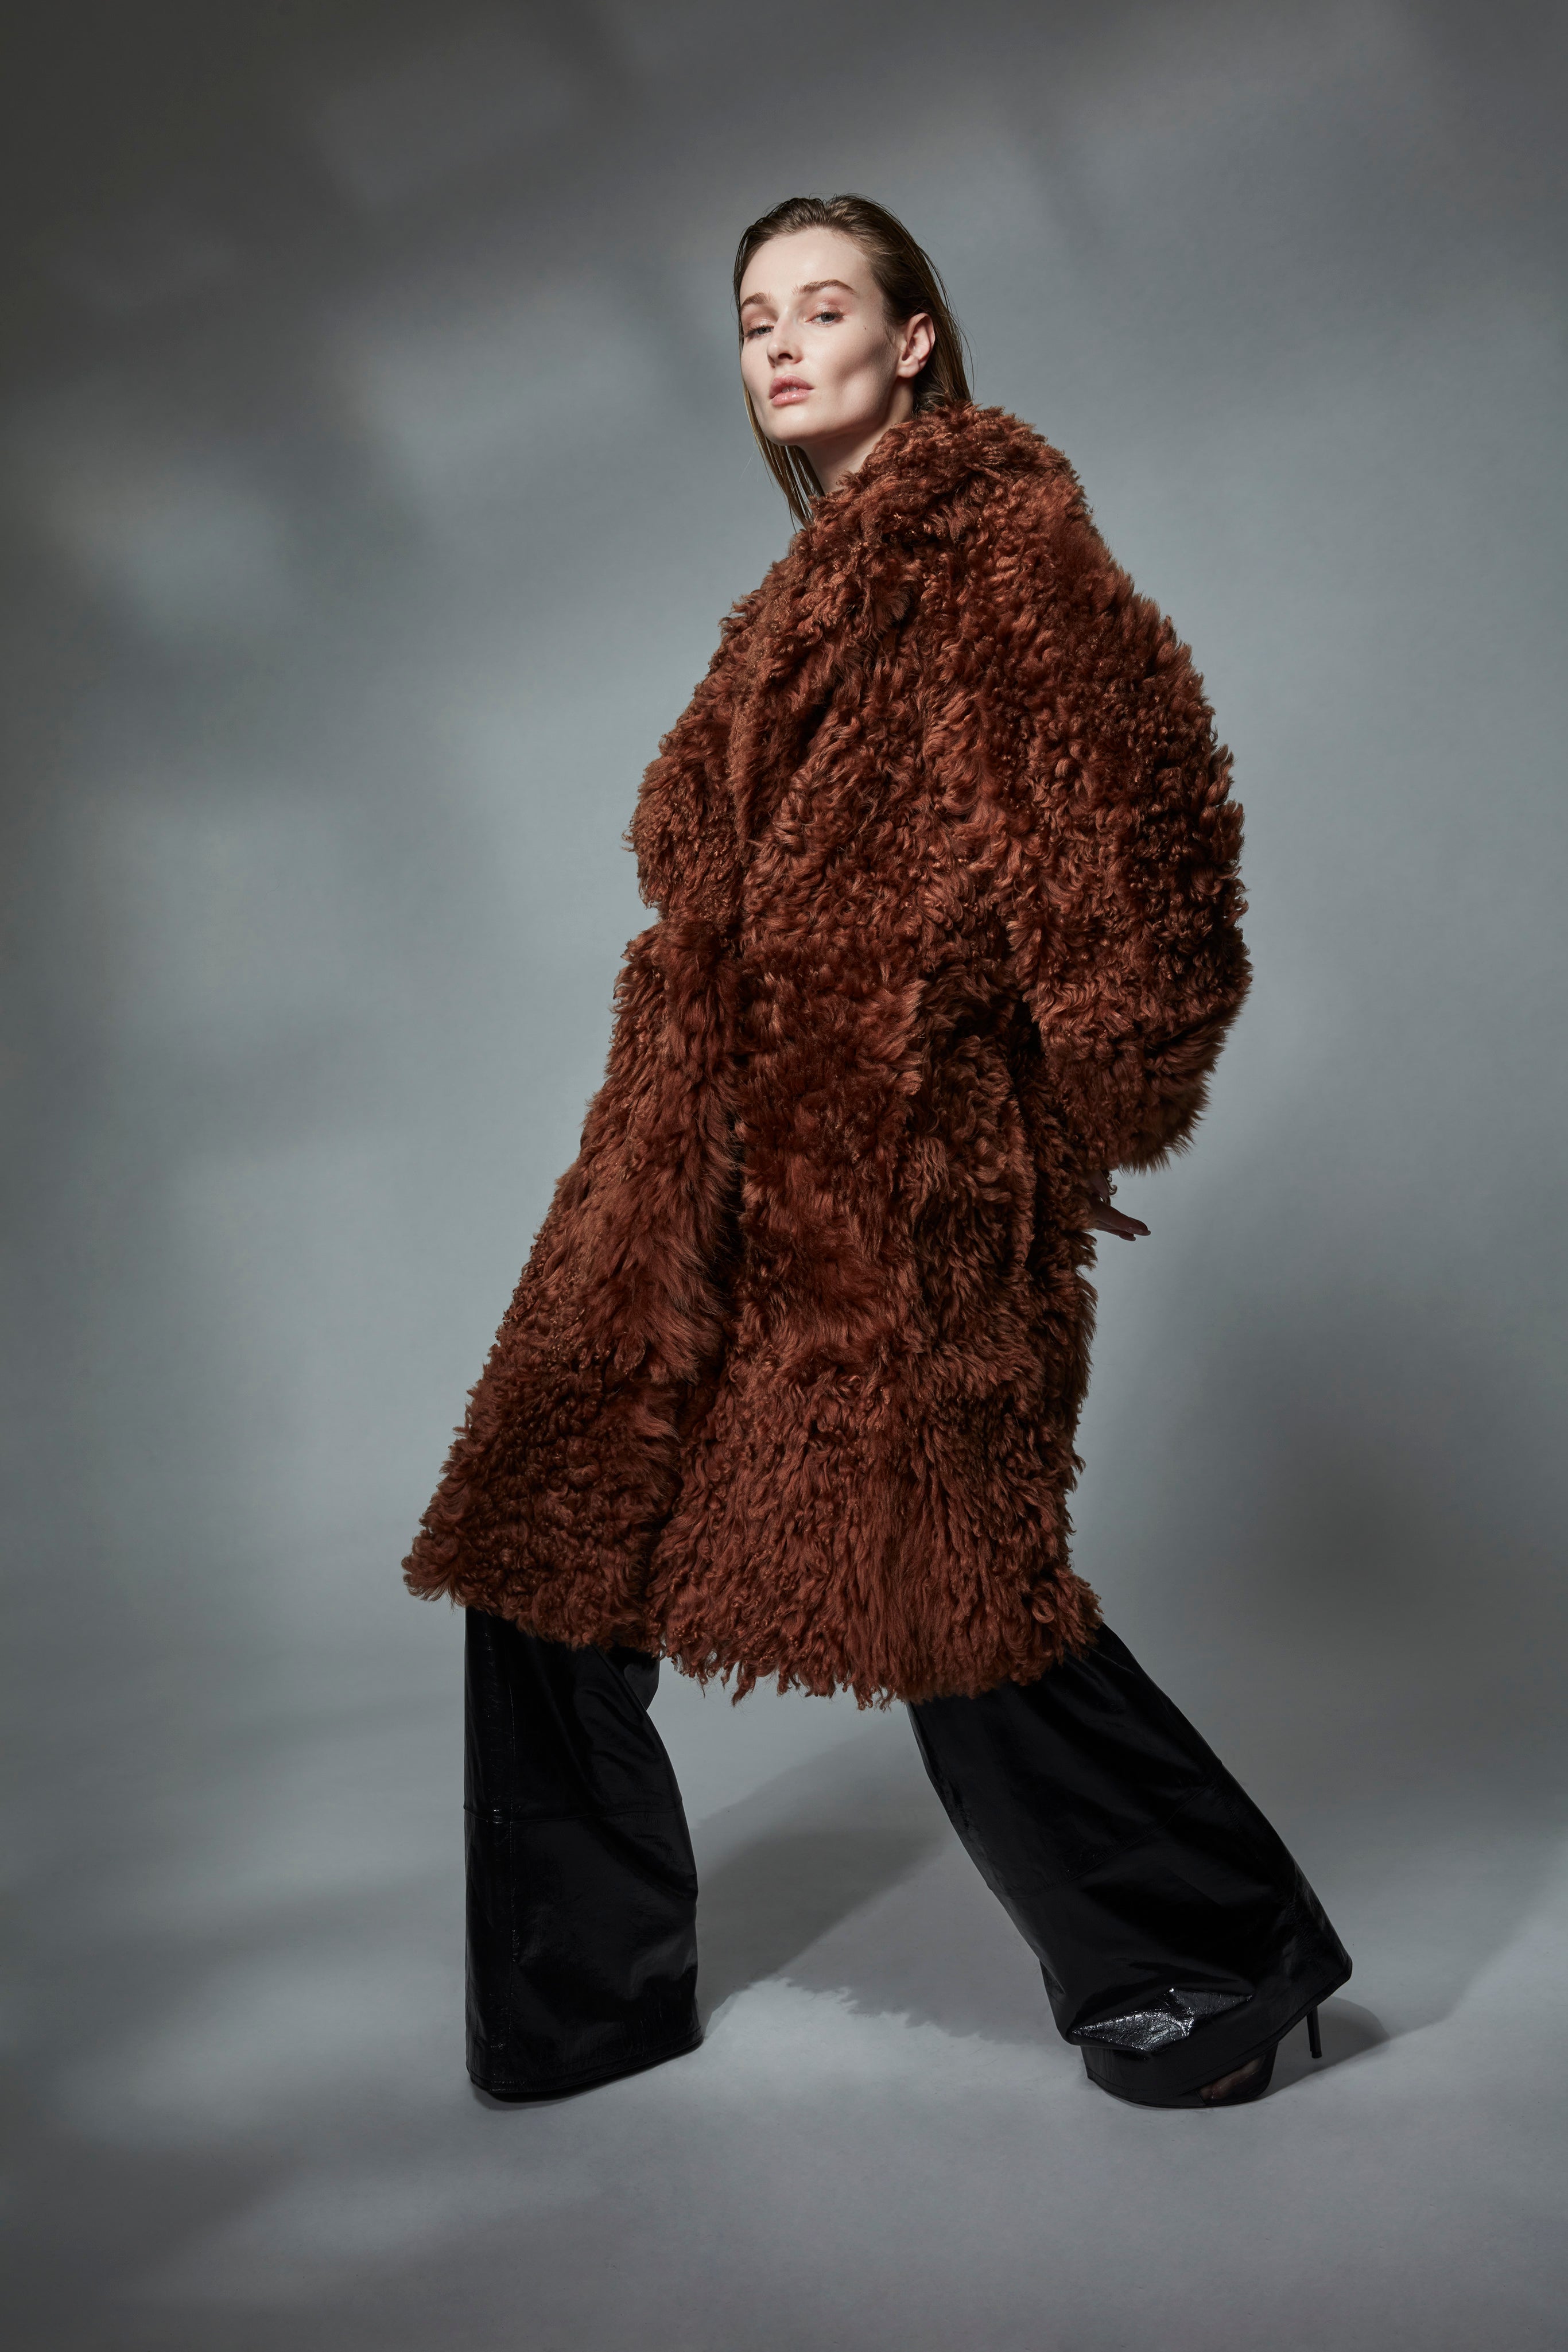 OVERSIZED SUSTAINABLE NATURAL CURLY SHEARLING COAT – Yigal Azrouël